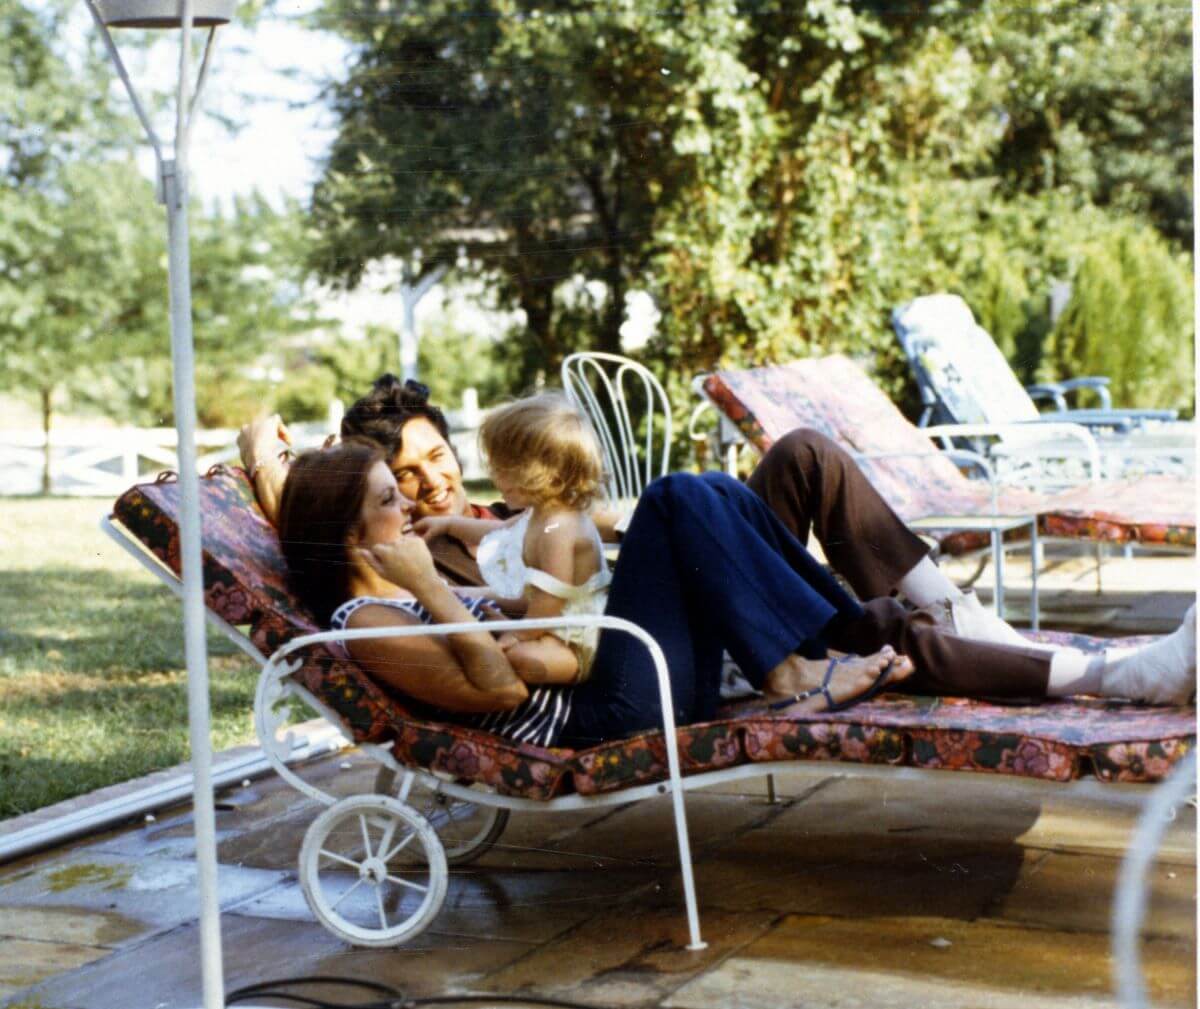 Priscilla and Elvis Presley lay on lounge chairs. Lisa Marie Presley sits on Priscilla's stomach.